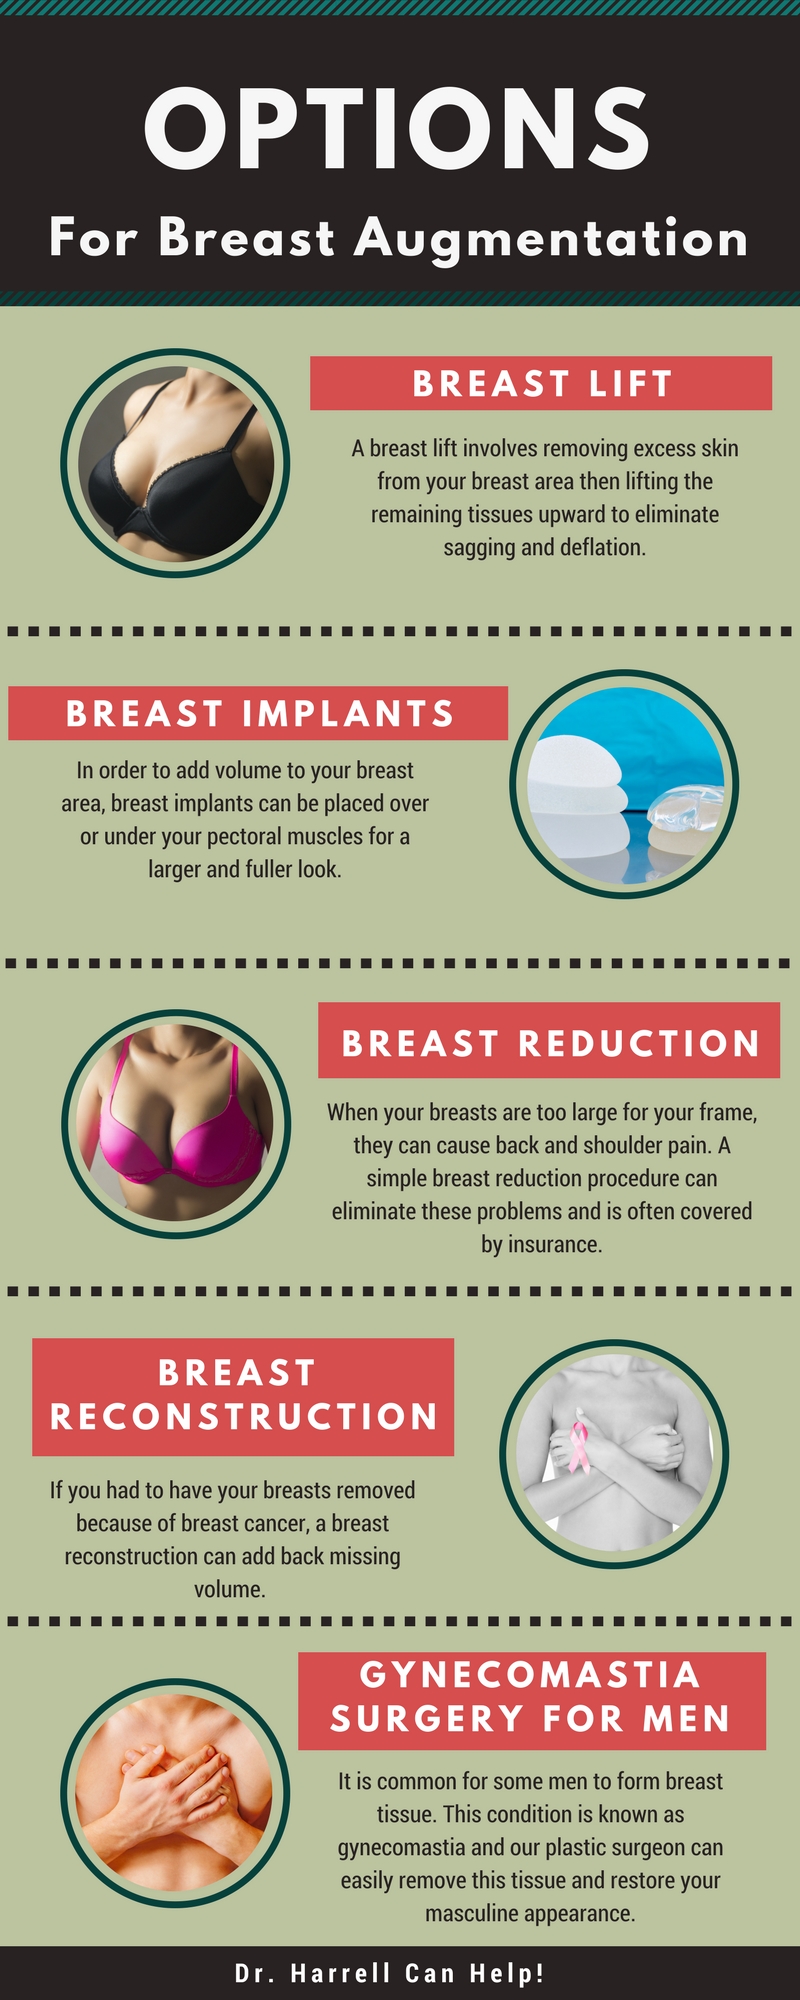 How Is Breast Reduction in Miami Different for Men vs. Women?